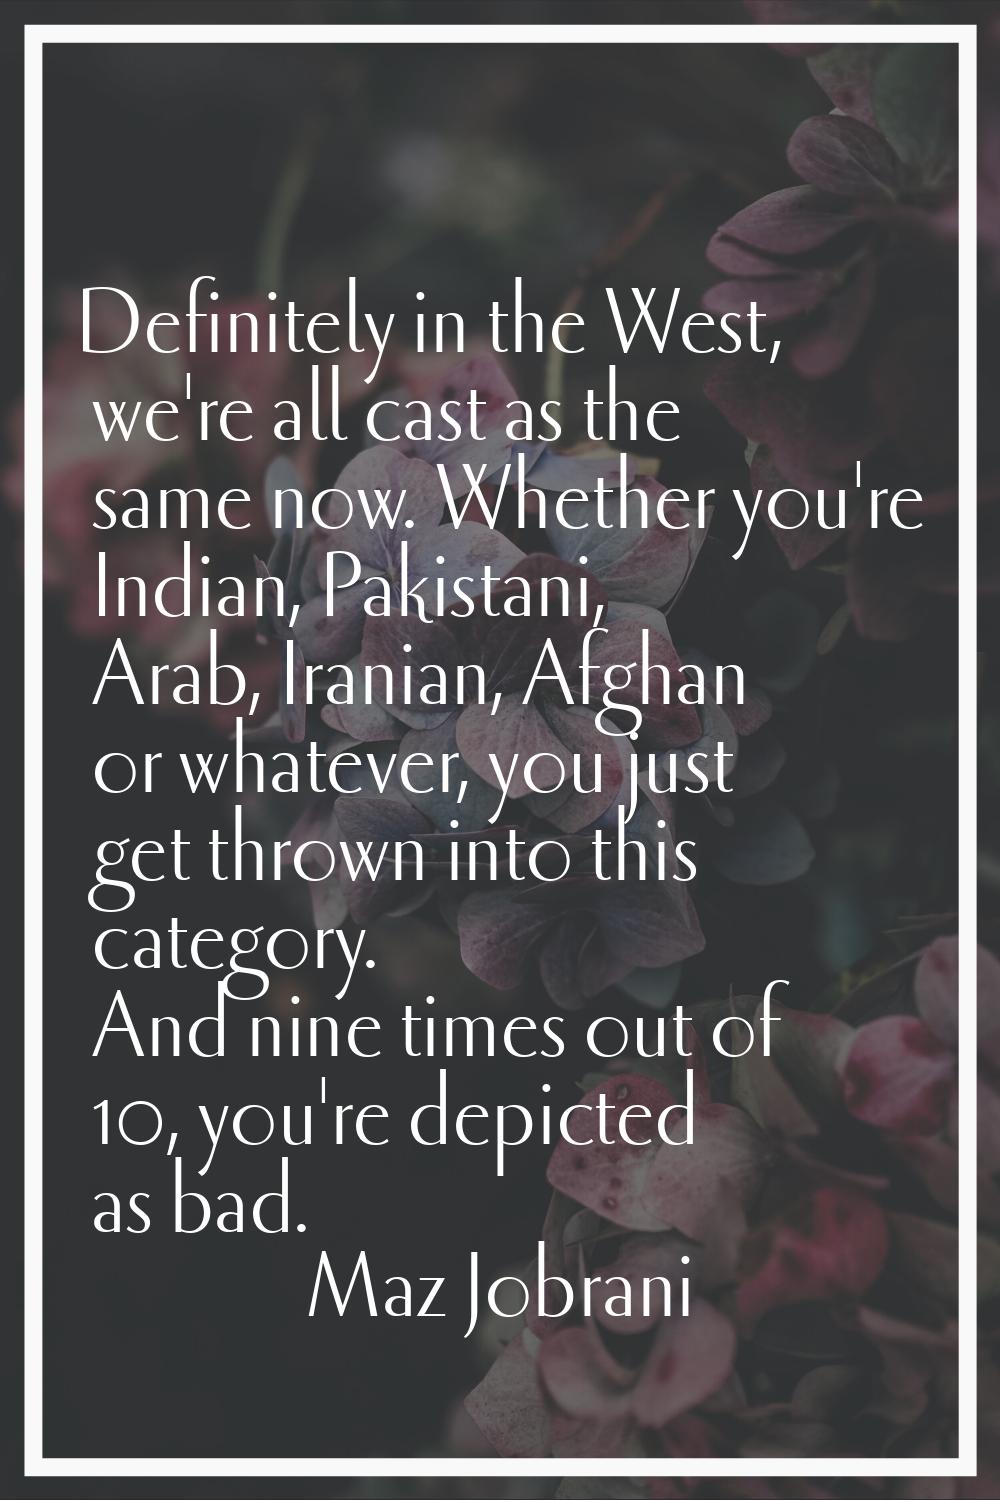 Definitely in the West, we're all cast as the same now. Whether you're Indian, Pakistani, Arab, Ira